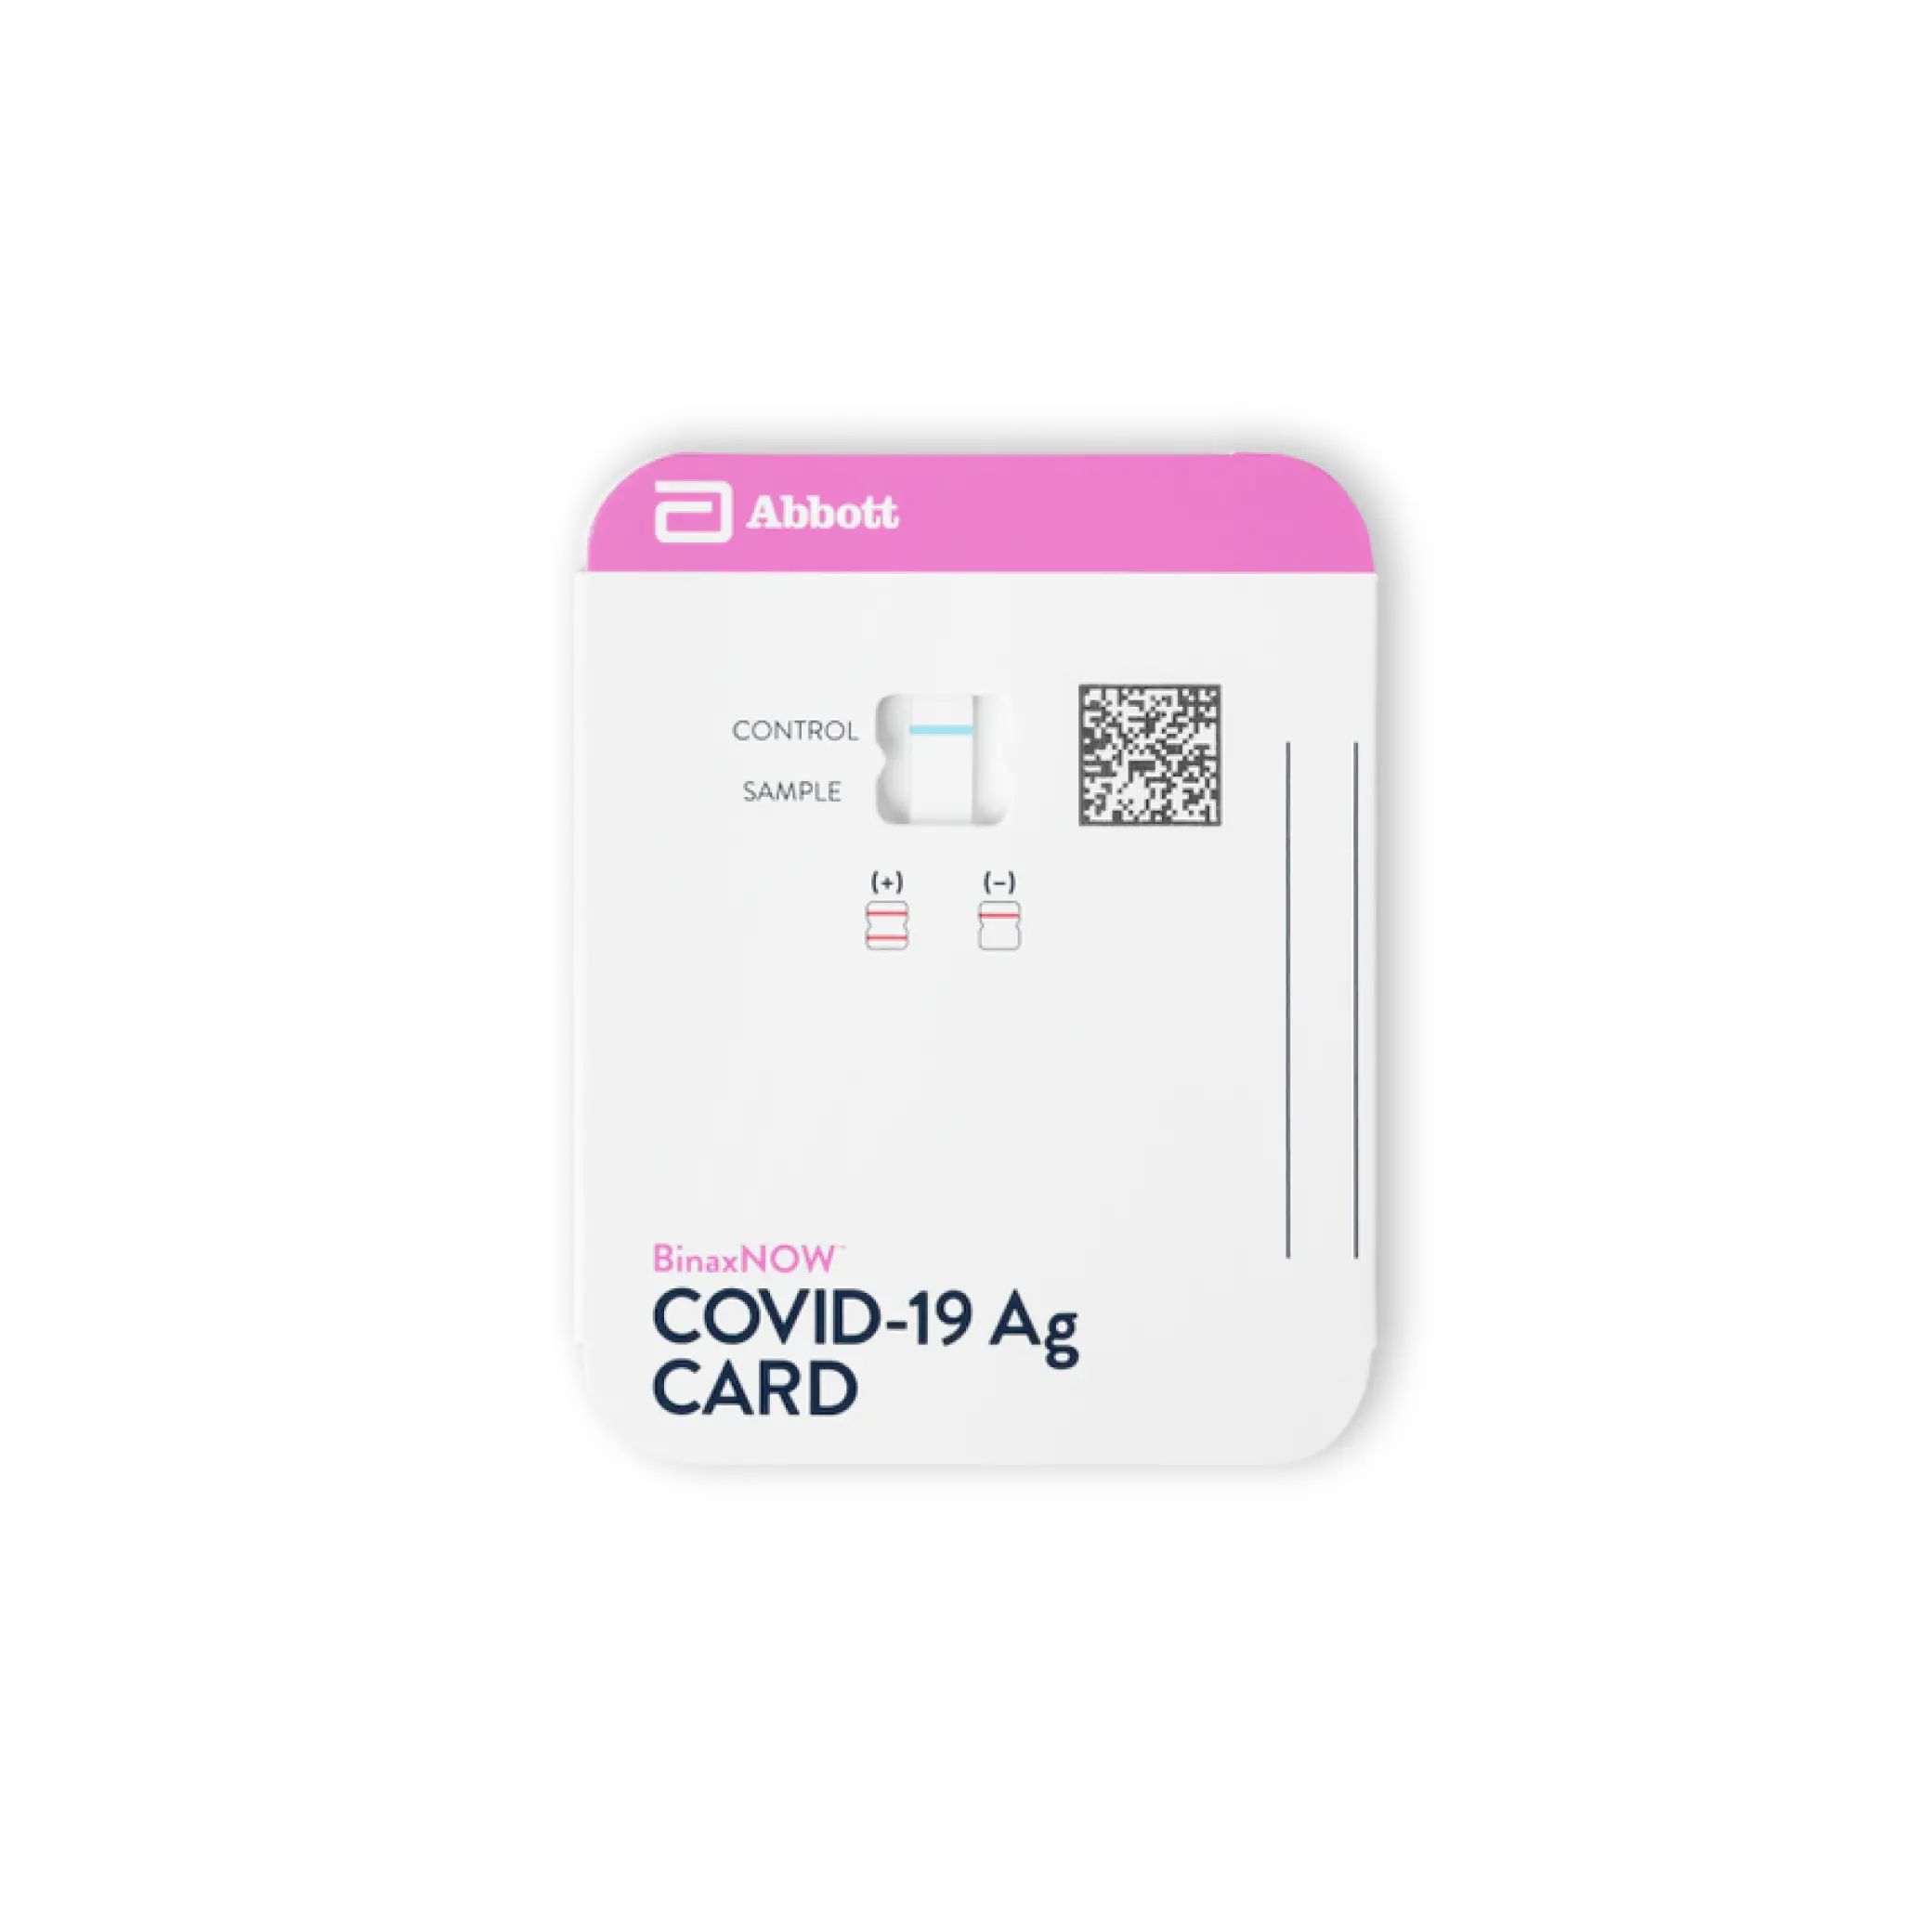 DISCAbbott BinaxNOW™ COVID-19 Ag Card Home Test with eMed Telehealth Services for Travel - 2 Pack